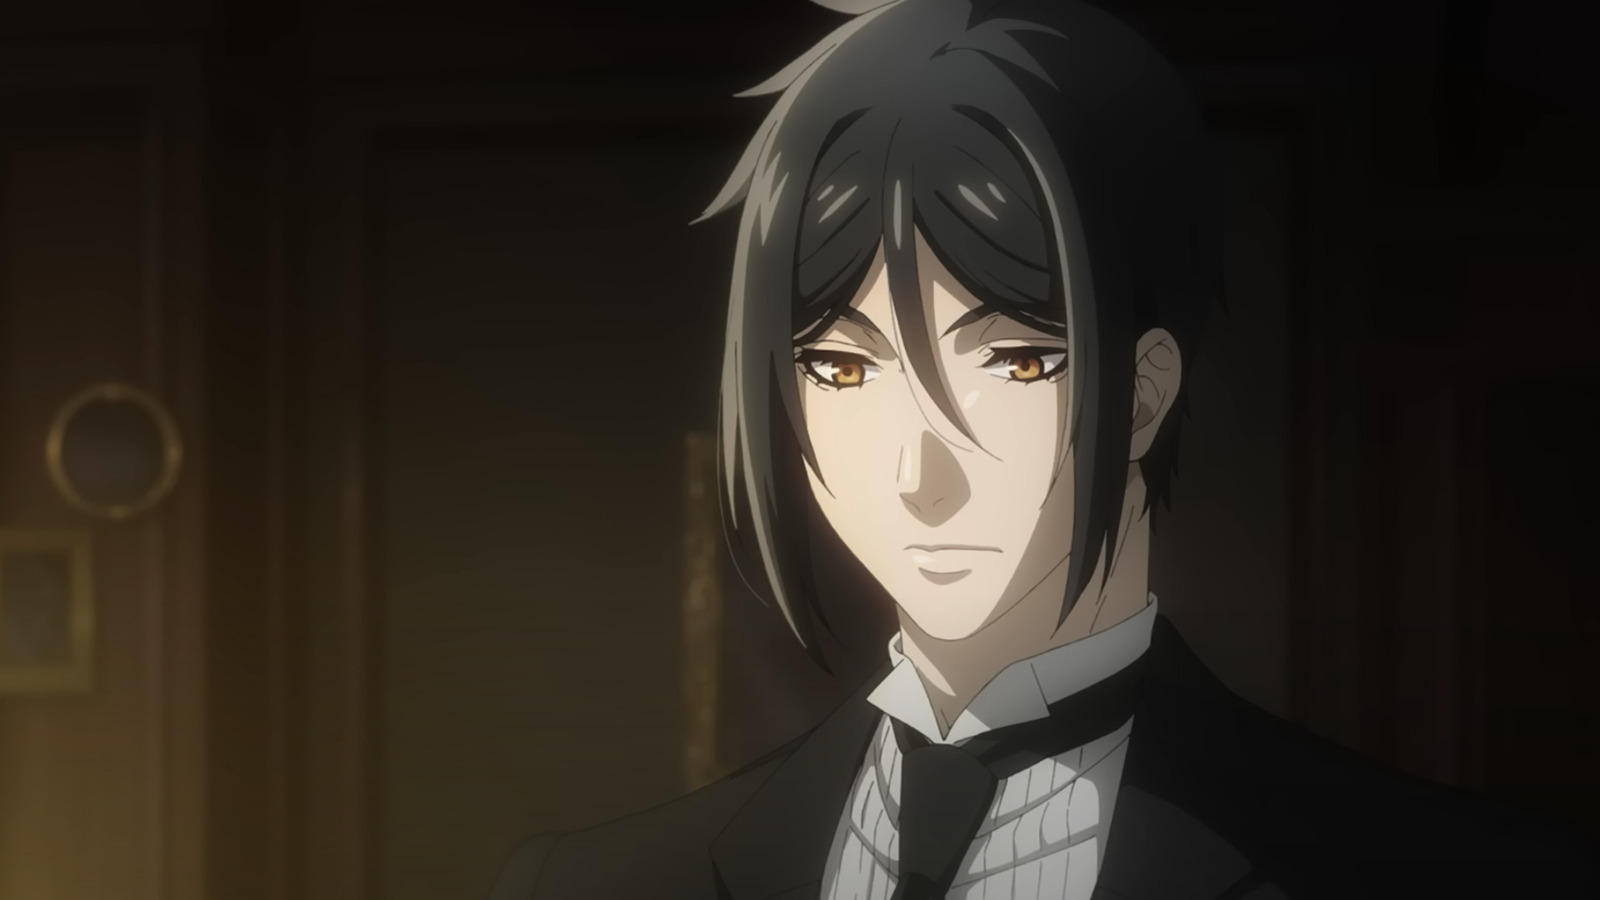 The Black Butler anime revival is officially underway!  Watch the trailer